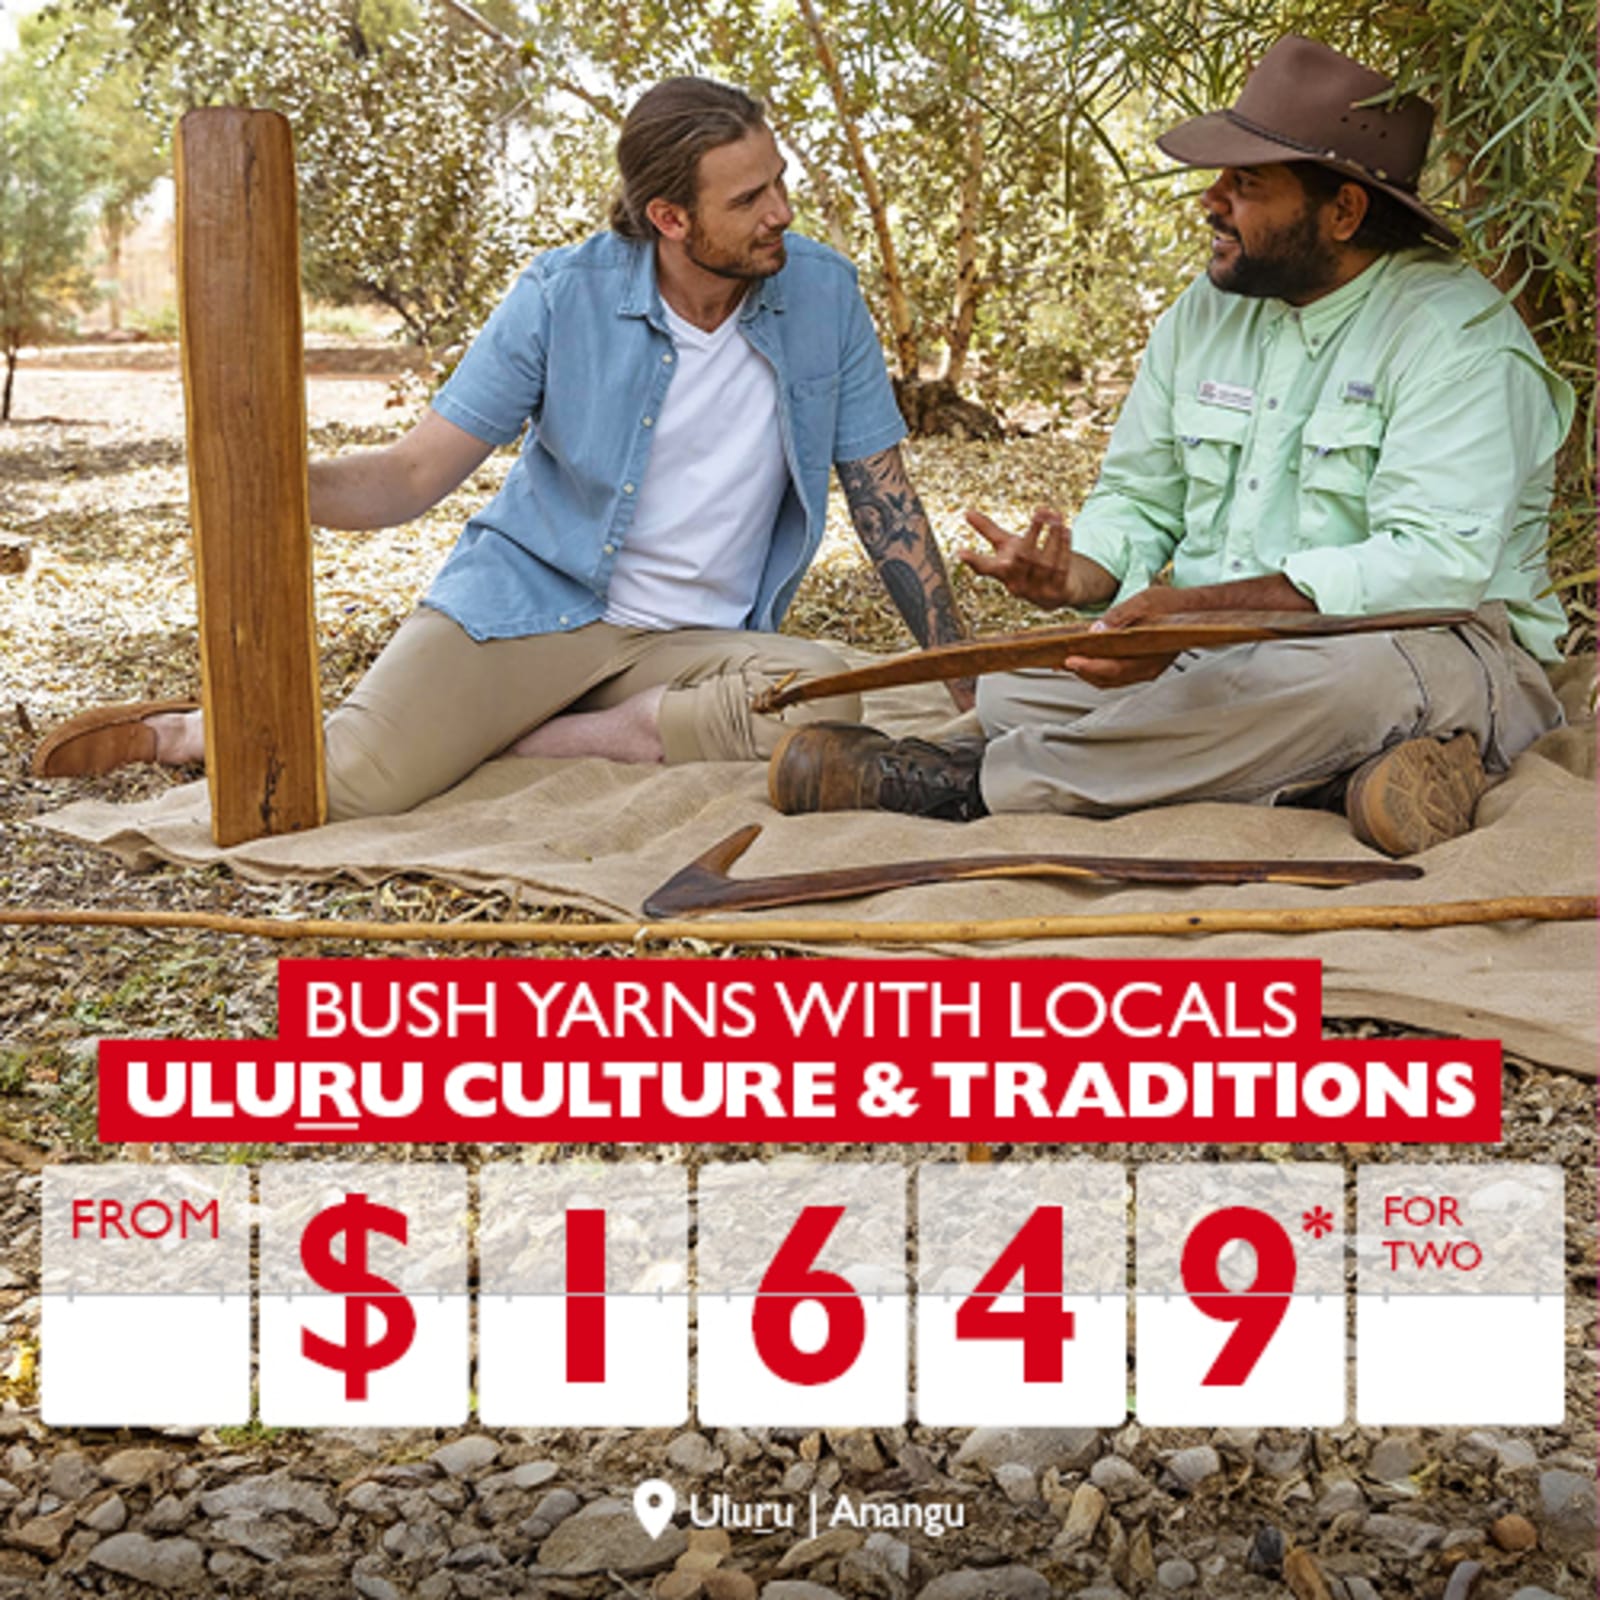 Bush yarns with locals | Uluru culture & traditions from $1649* for two